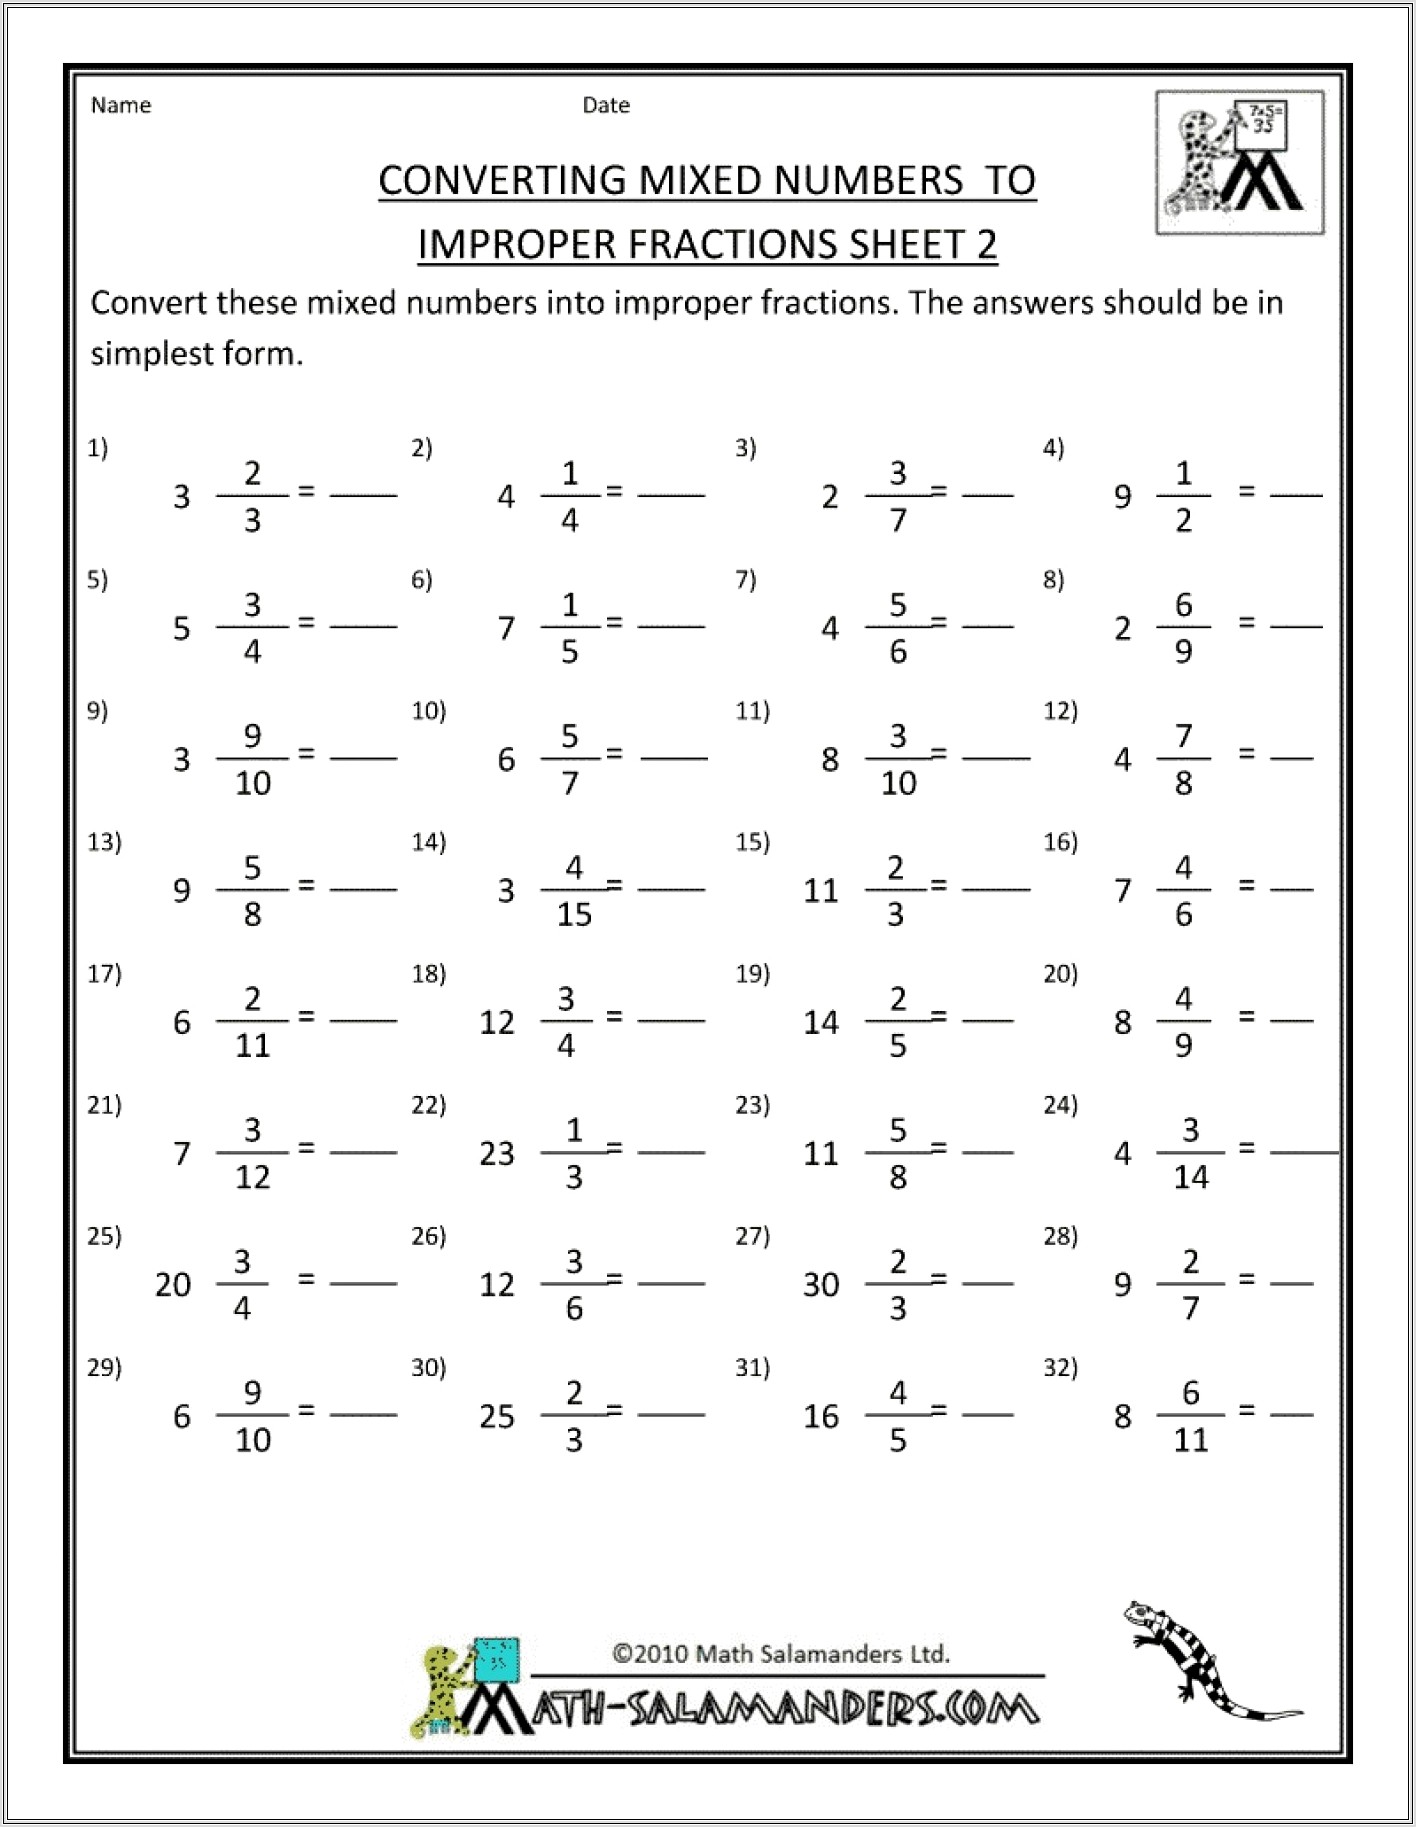 Improper Fractions And Mixed Numbers Worksheet Pdf